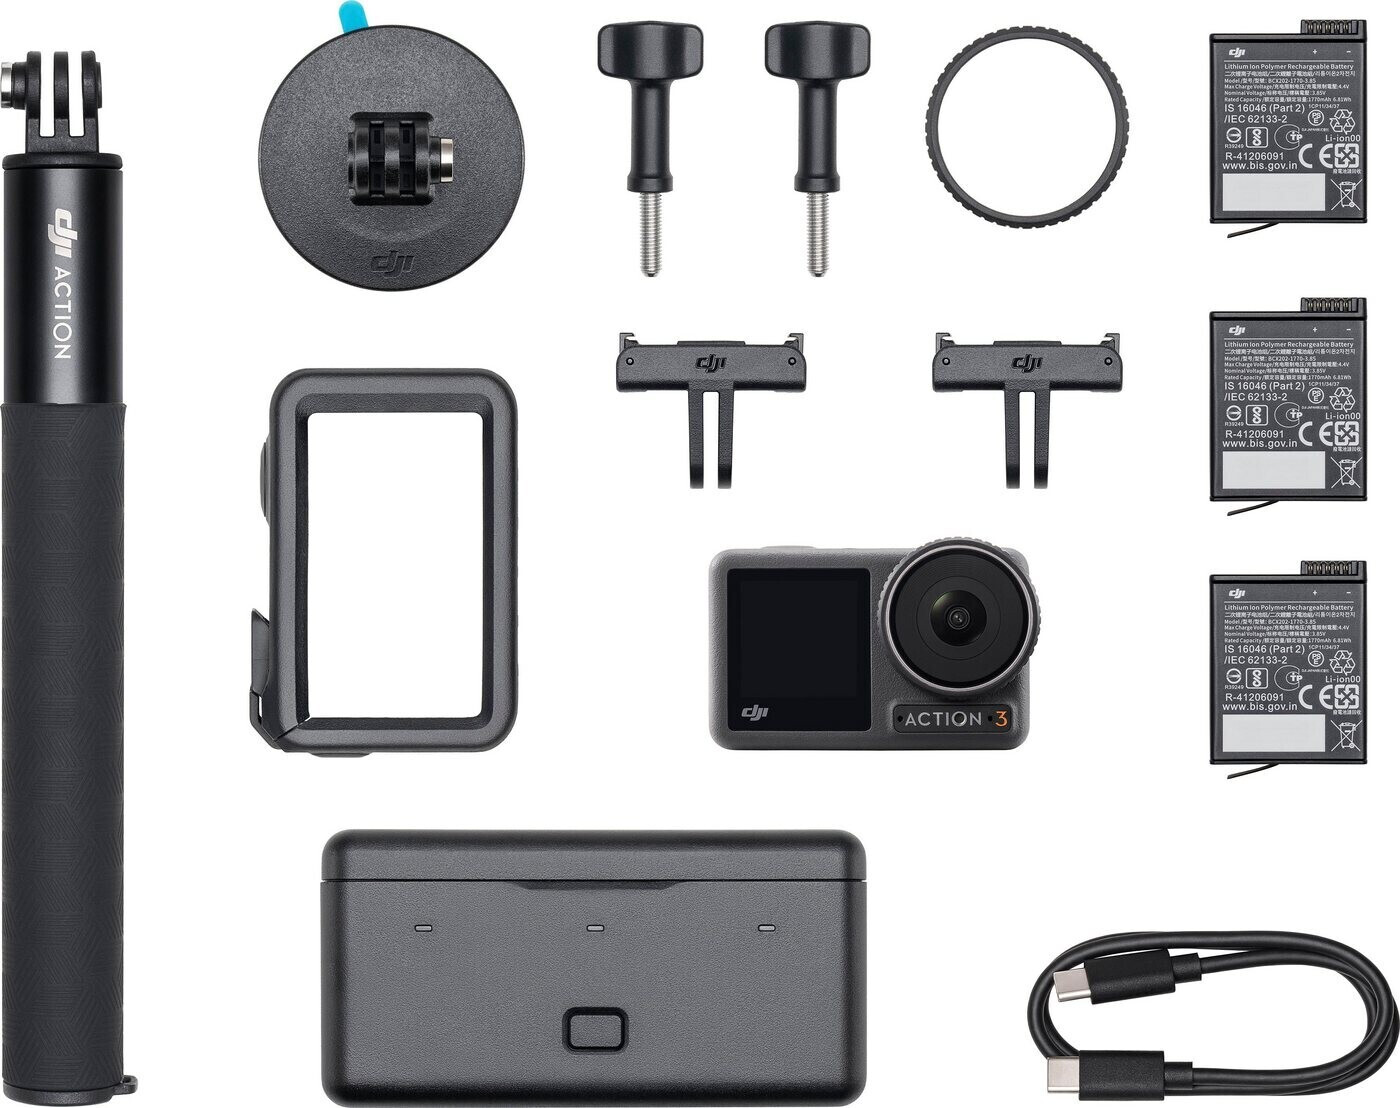 3 DJI from on Buy Deals Best £209.00 Osmo – (Today) Action